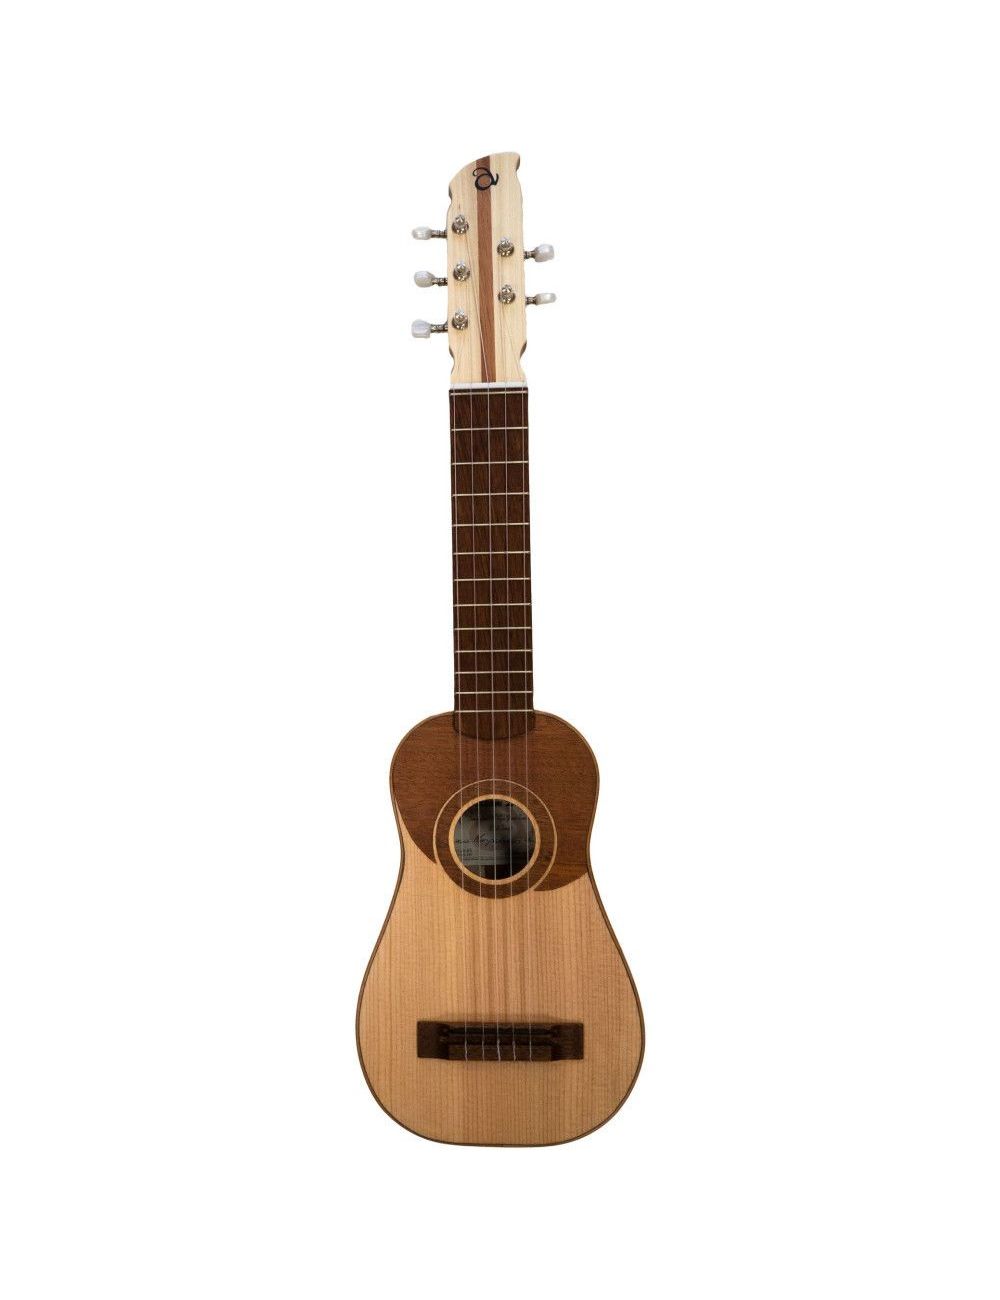 Canarian Timple Abraham Luthier Maspalomas 5310401 Other Stringed